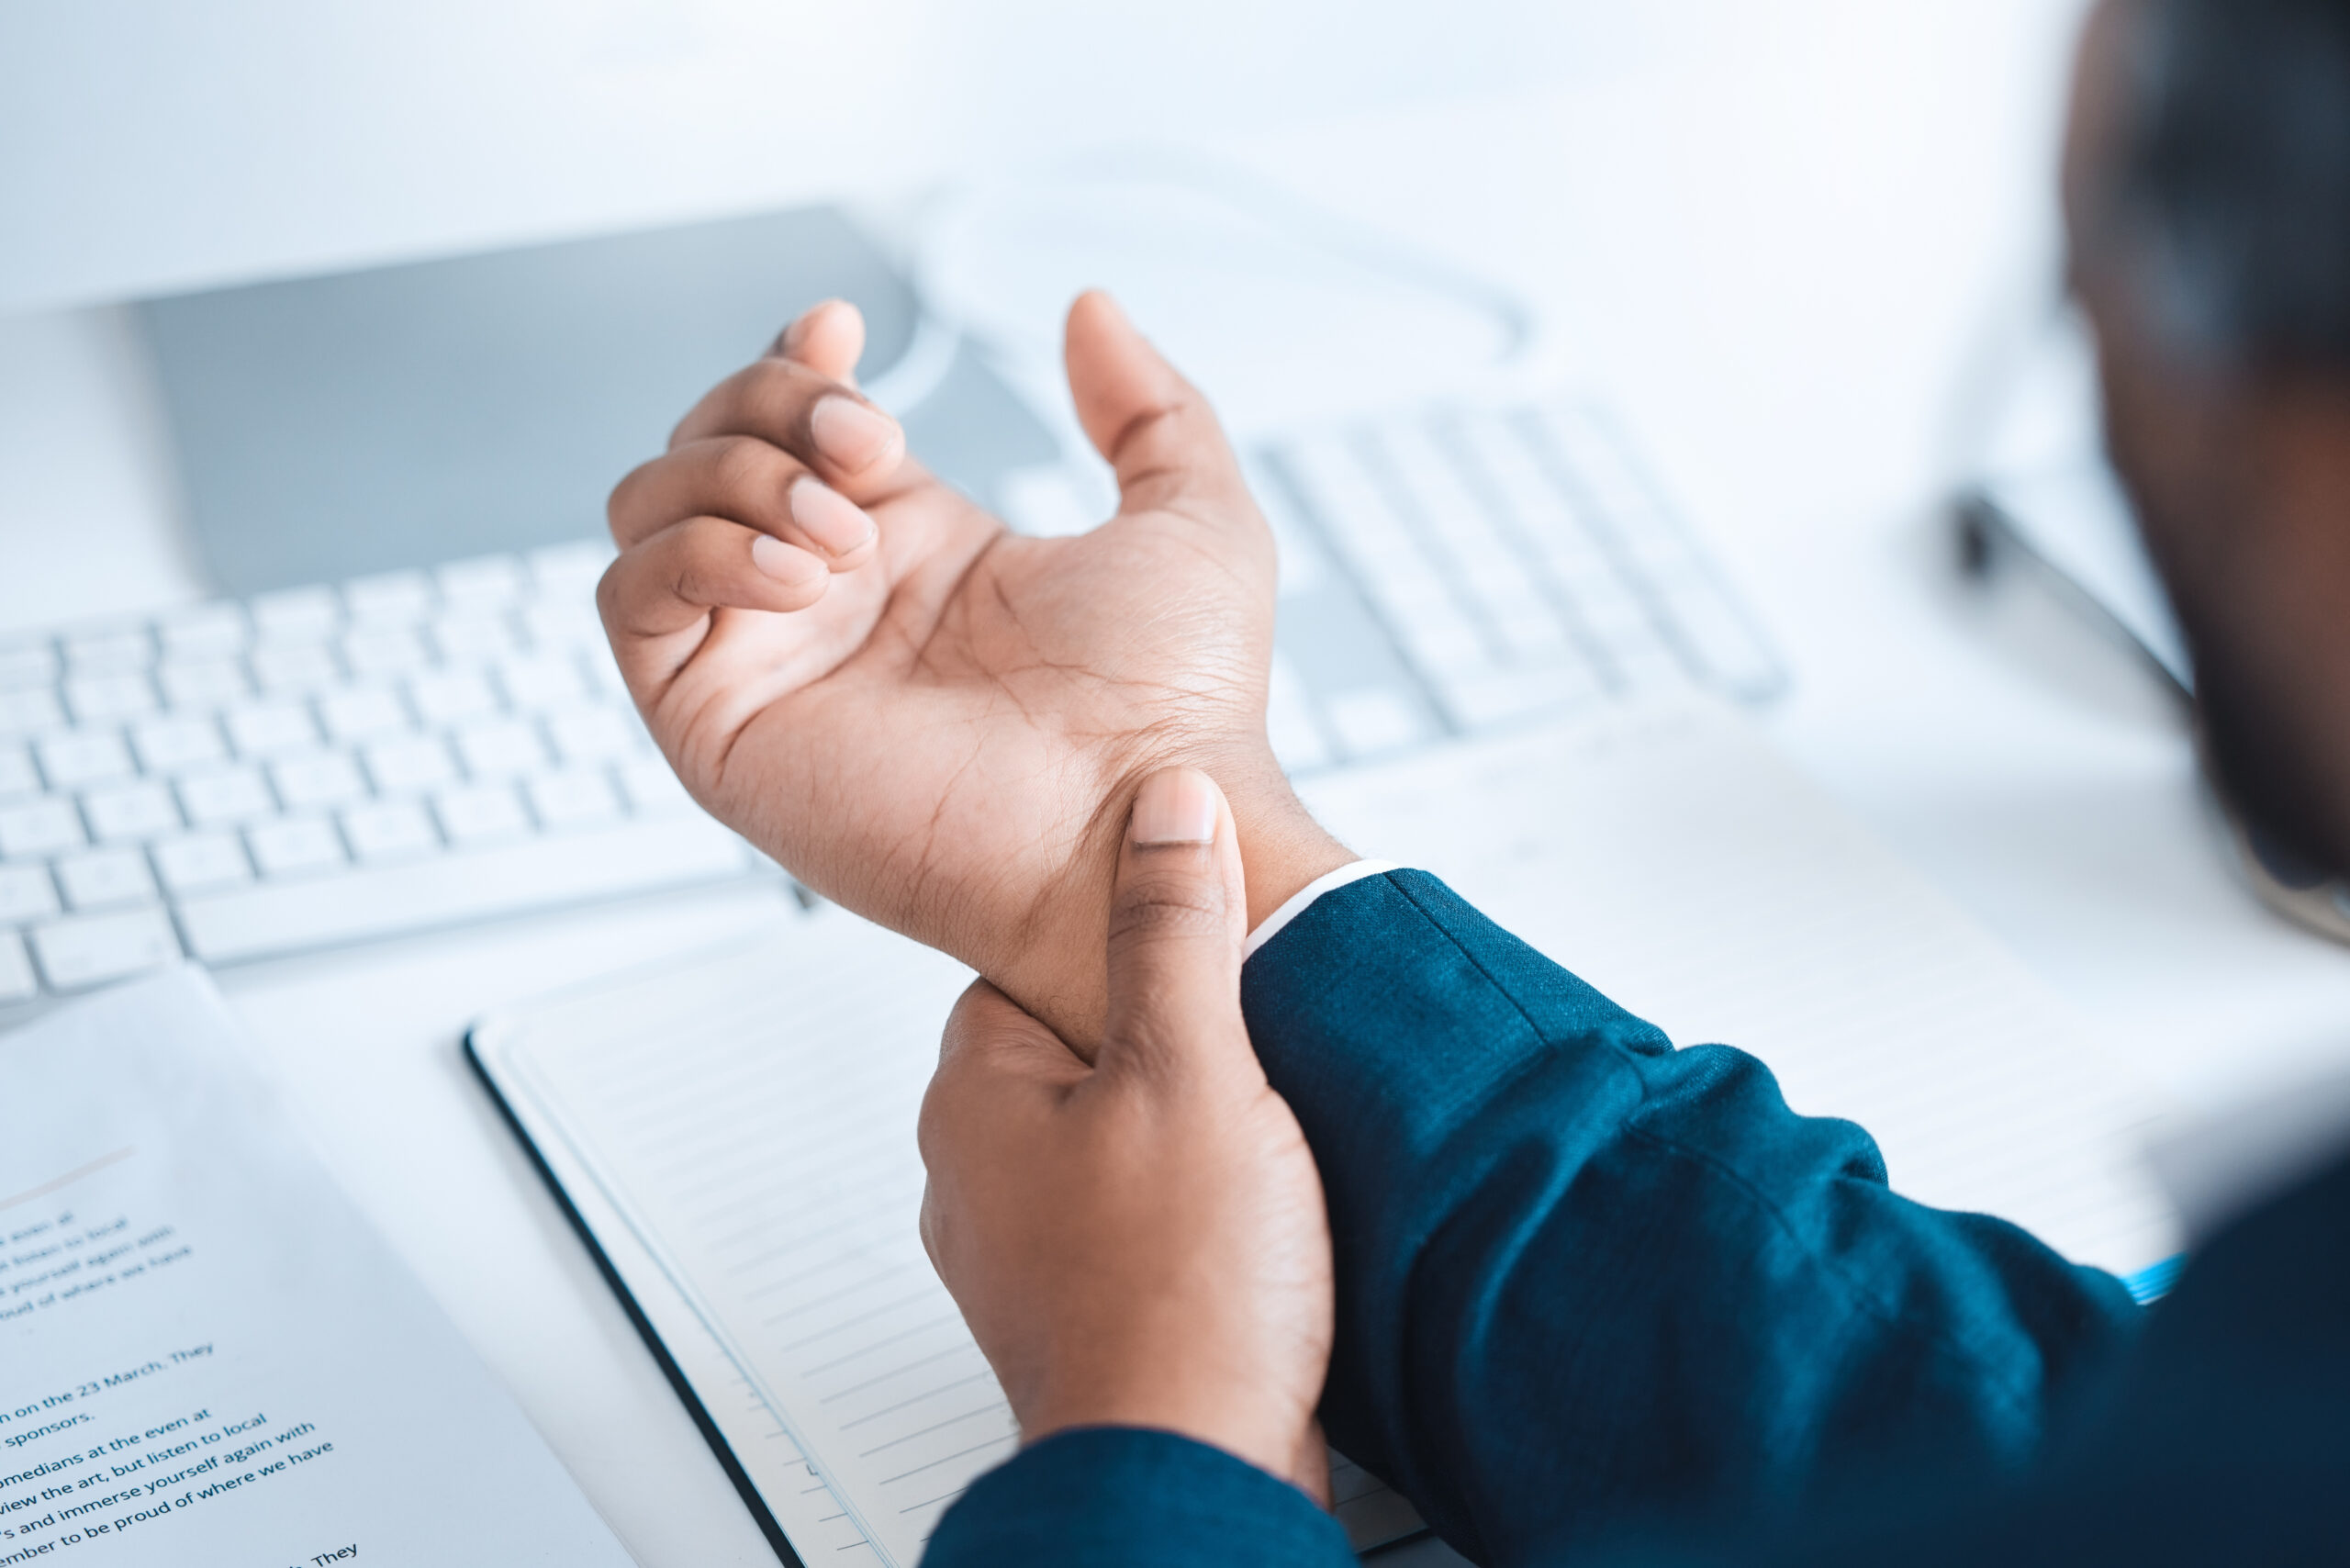 How do you prevent repetitive strain injuries (RSI)?